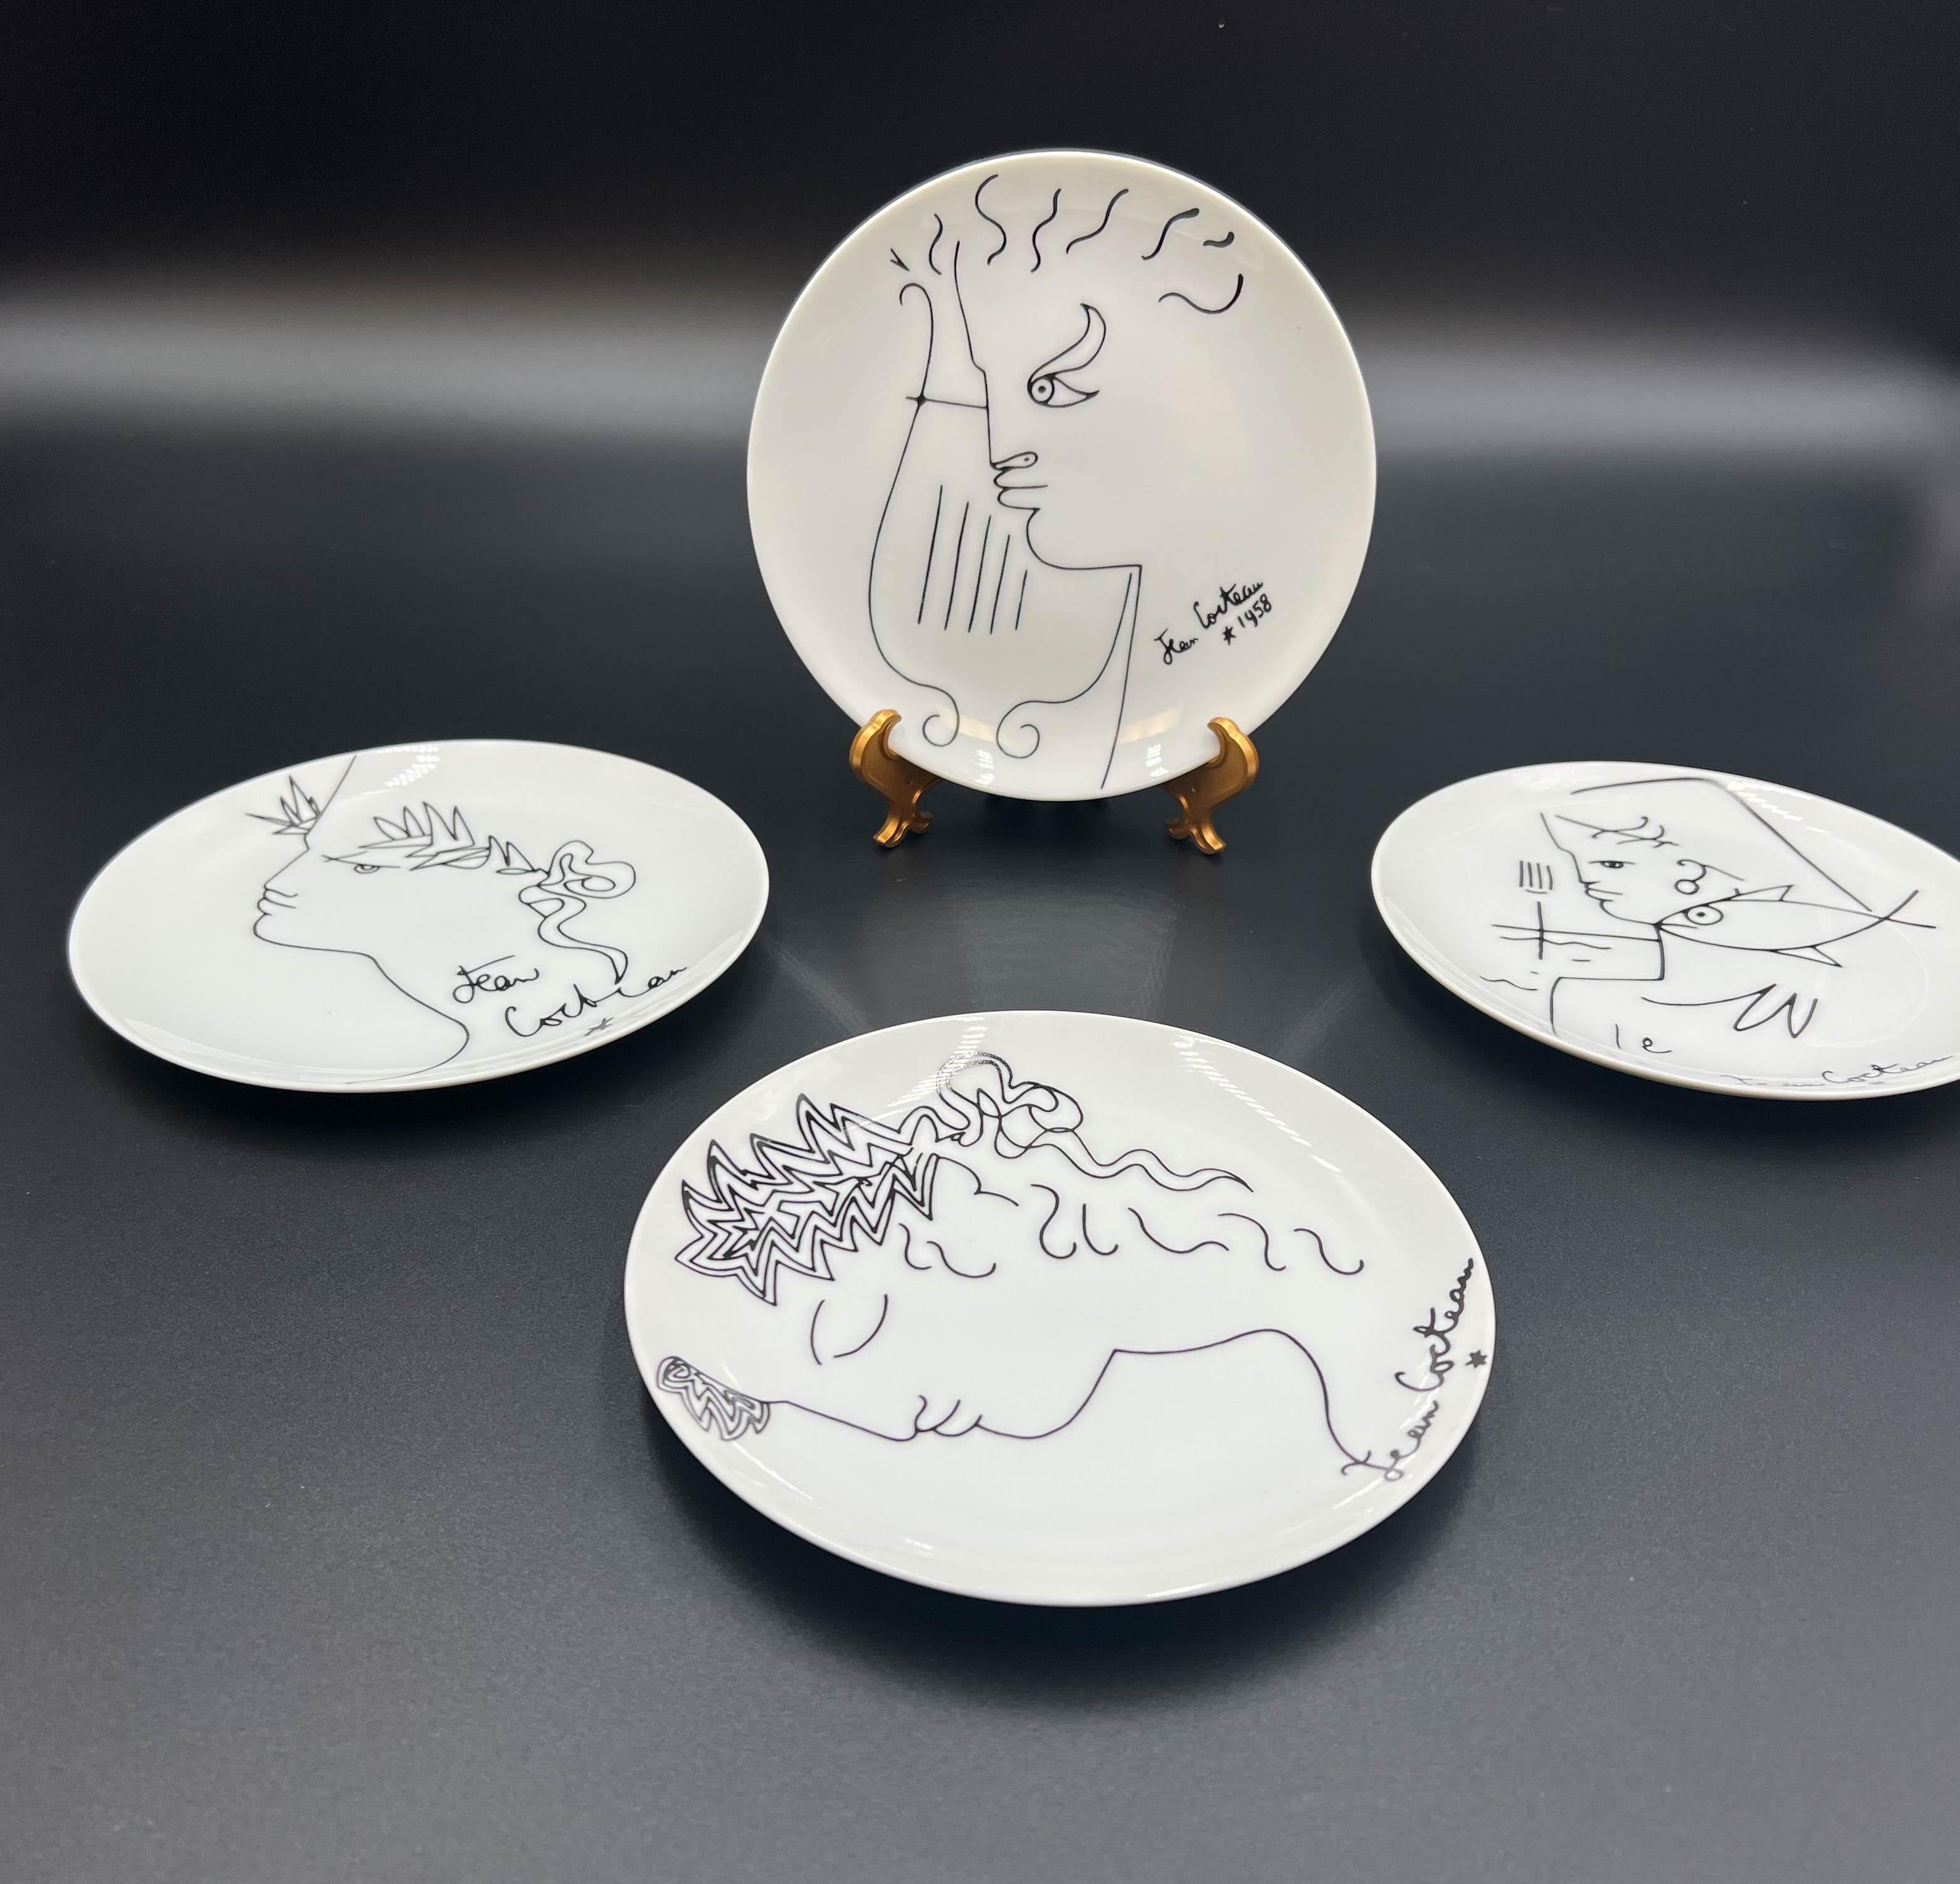 The set of four vintage porcelain plates by Jean Cocteau for the Limoges company in 1958 holds significant artistic and collectible value. Jean Cocteau, a prominent French artist known for contributing to various artistic disciplines, including